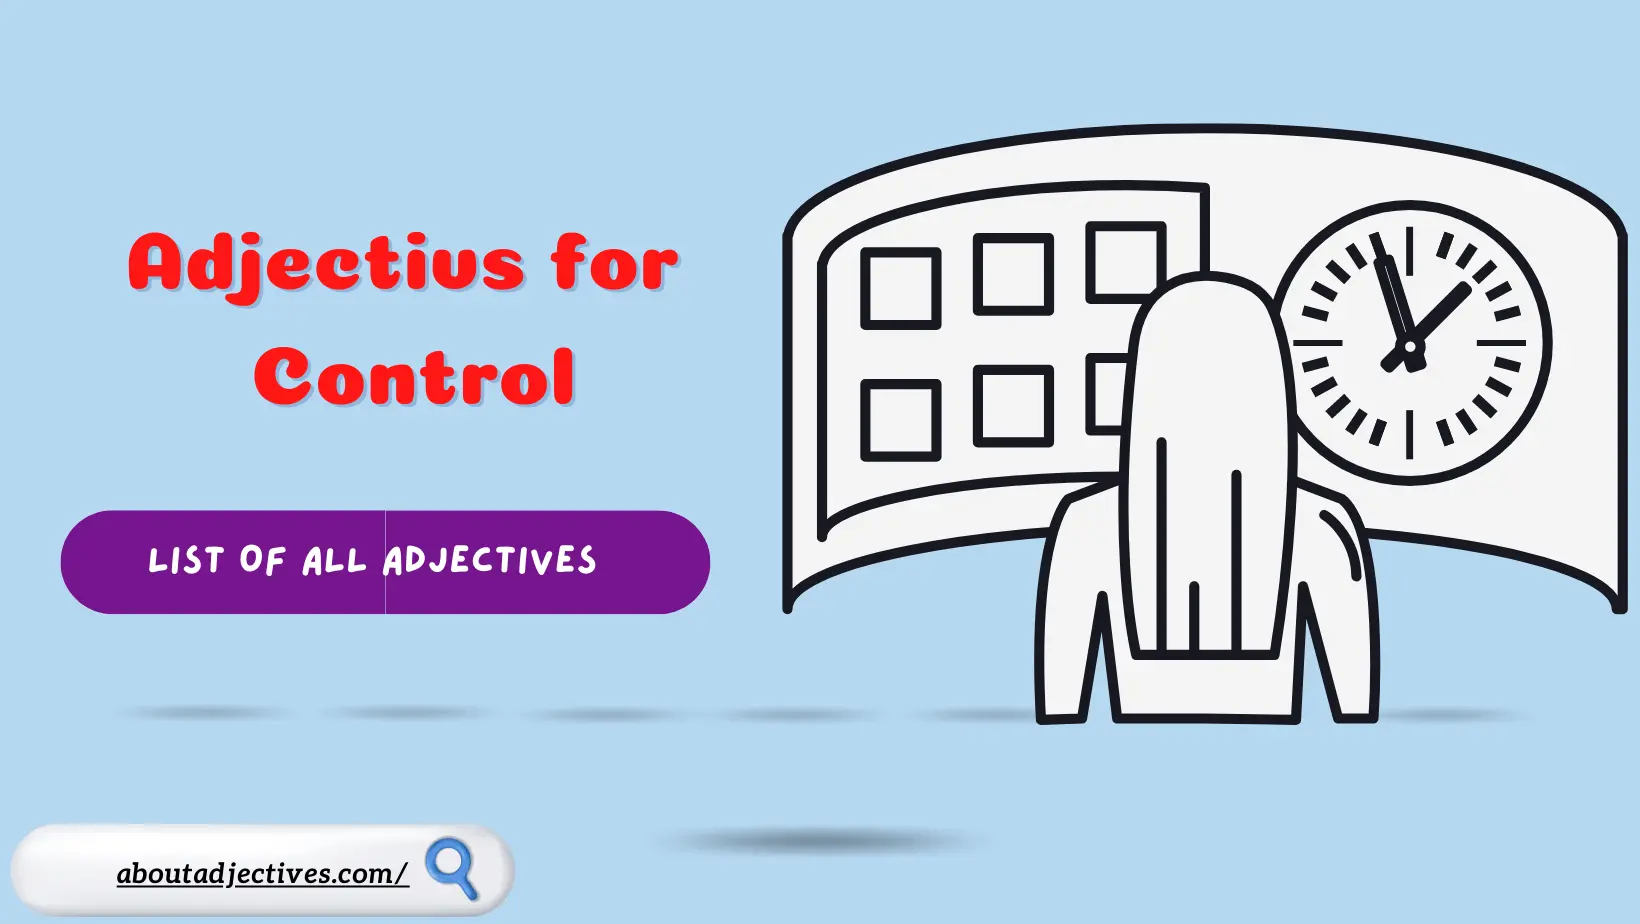 Adjectives for Control